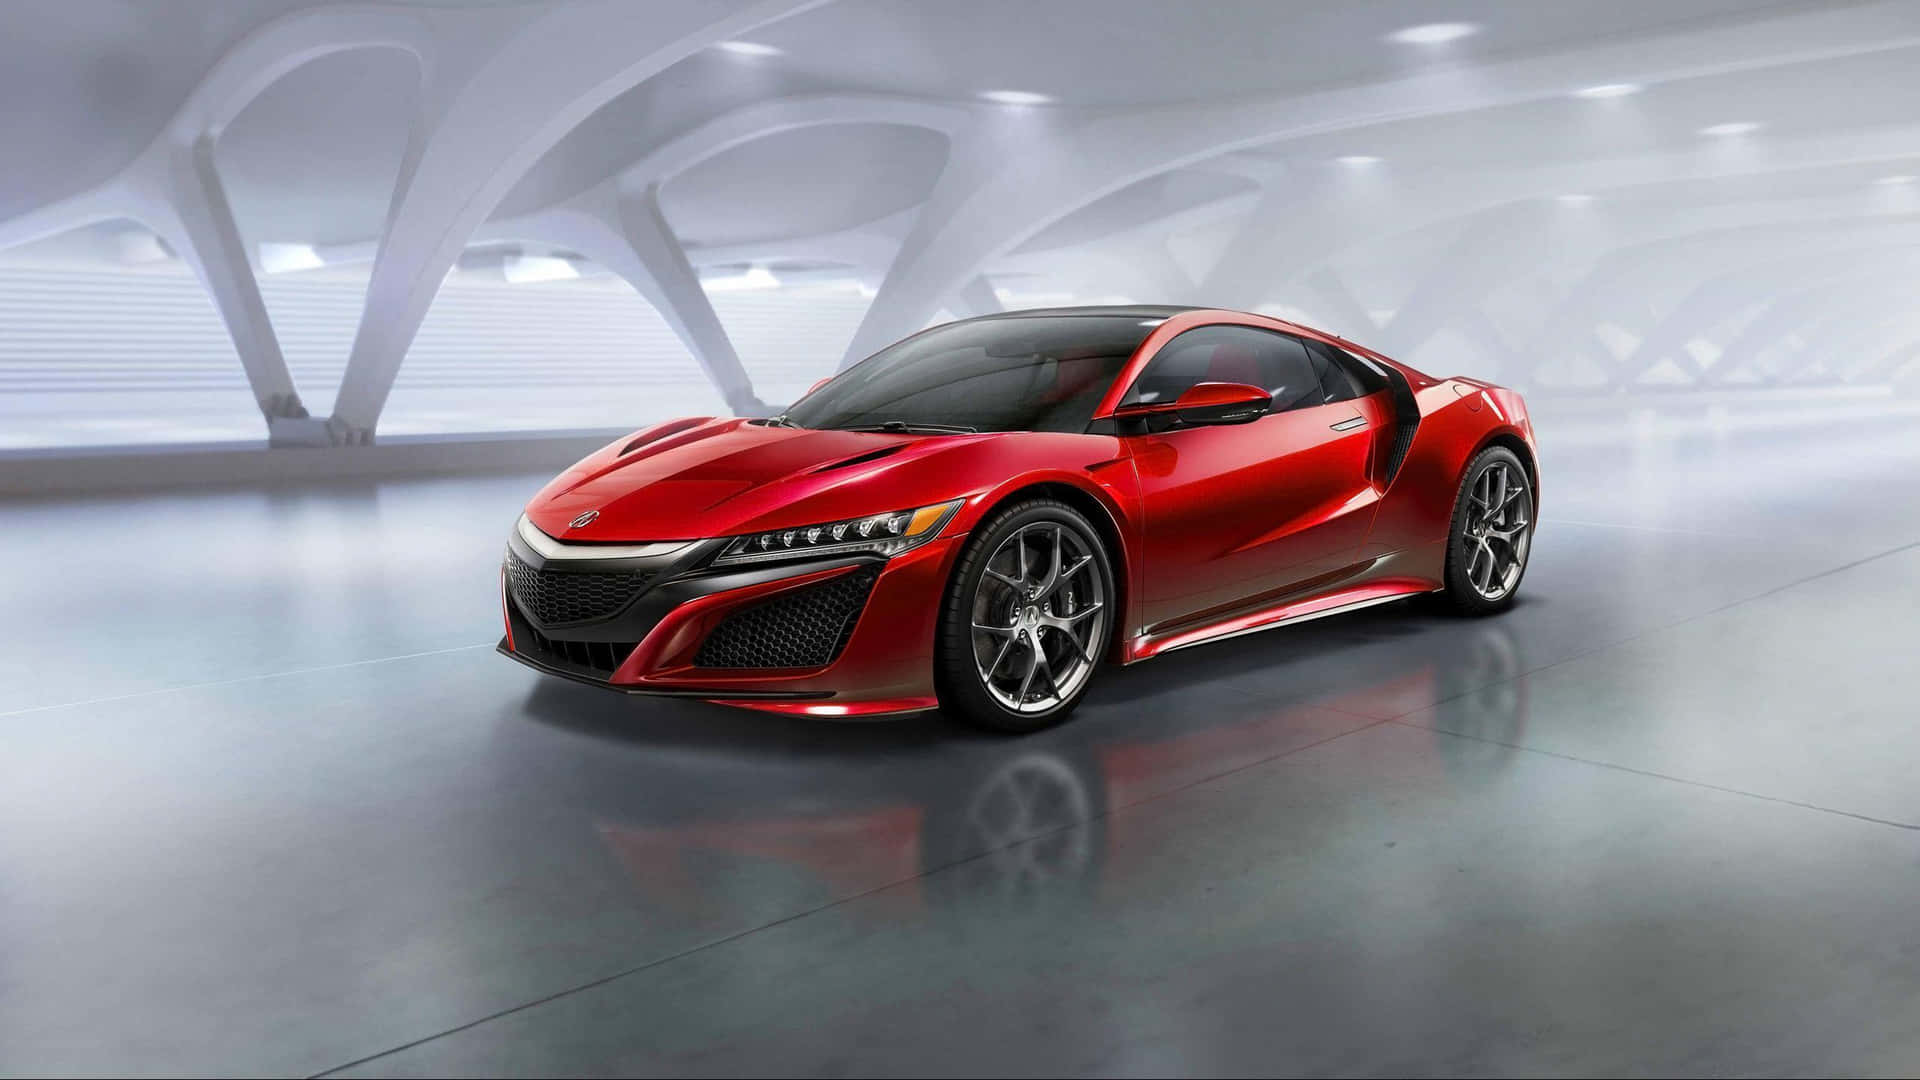 A Stunning Acura NSX Sports Car on Display Wallpaper